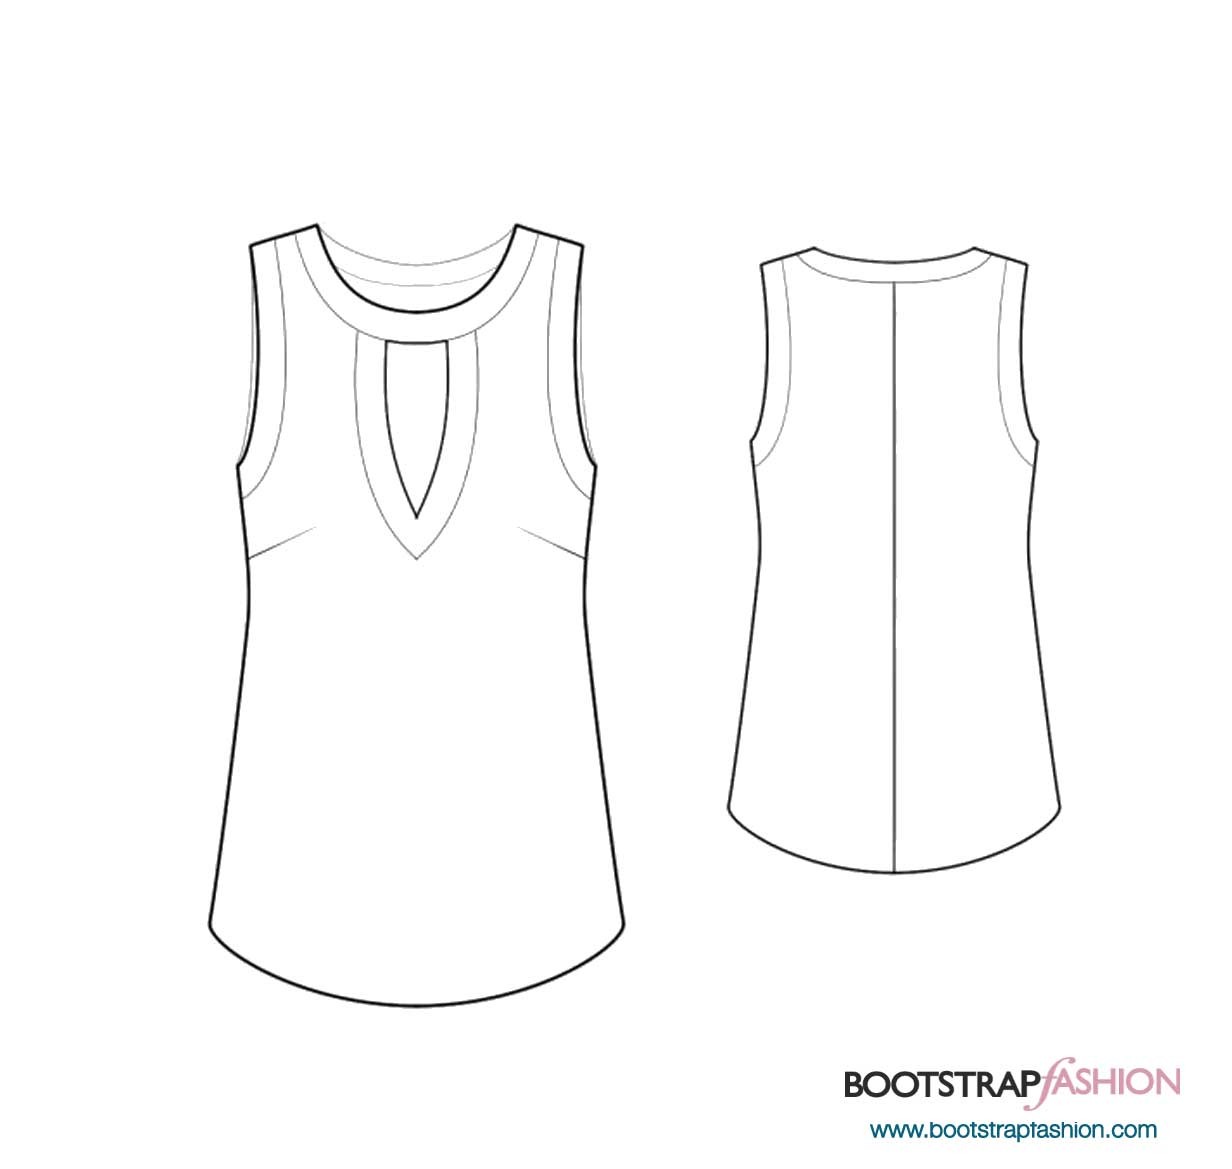 Bootstrapfashion.com - Designer Sewing Patterns, Free Trend Reports and ...